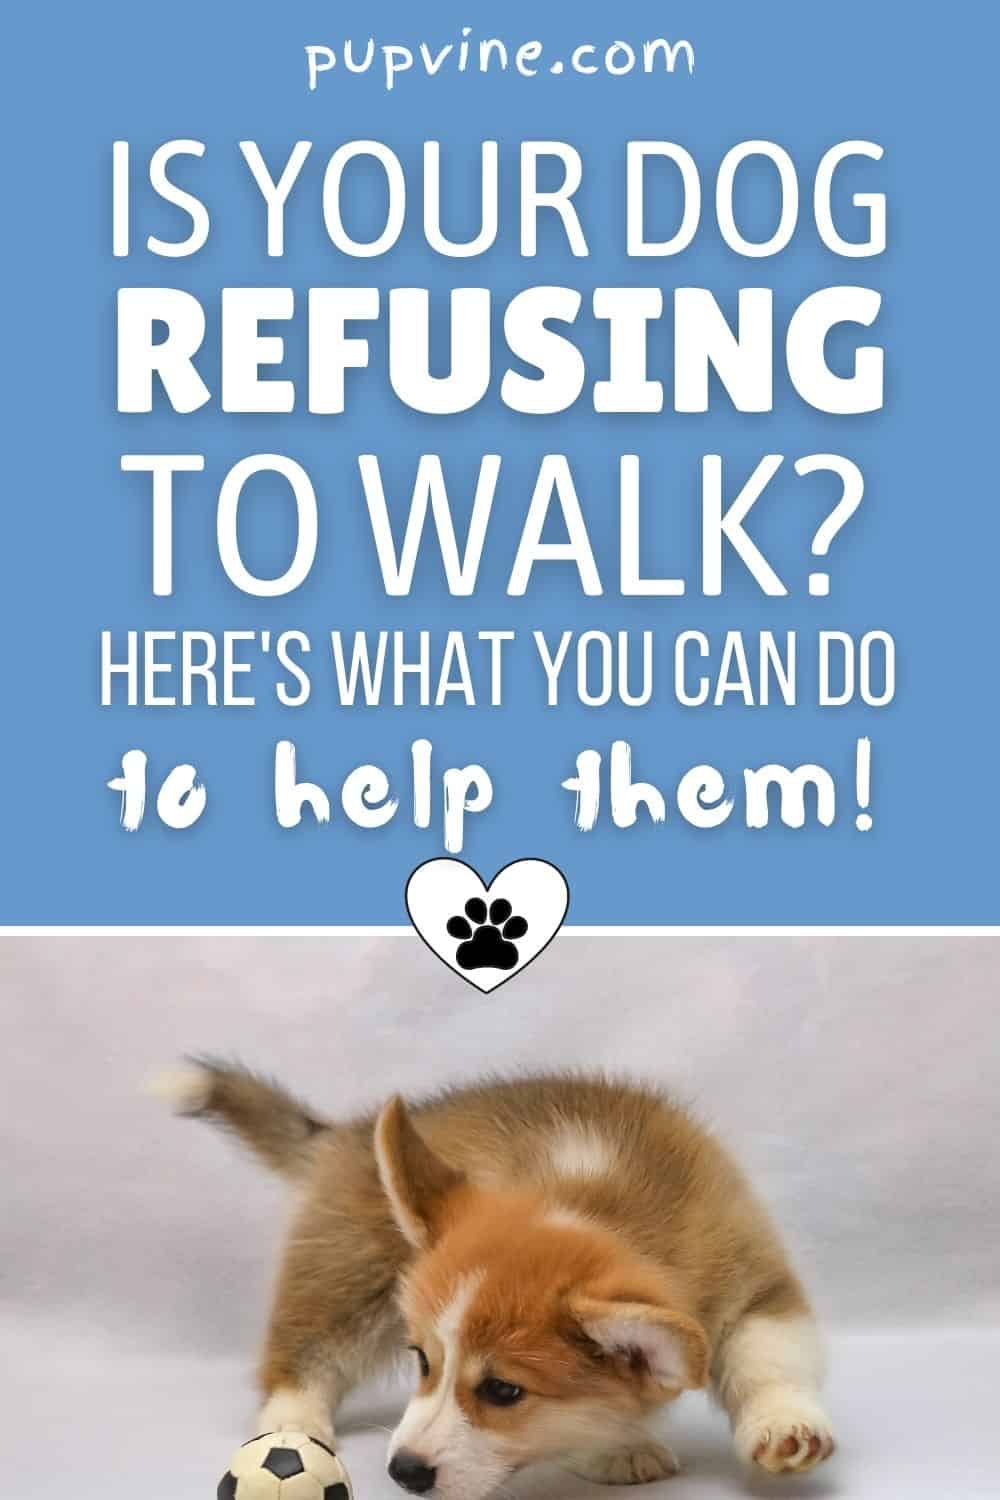 Is Your Dog Refusing To Walk? Here's What You Can Do To Help Them!